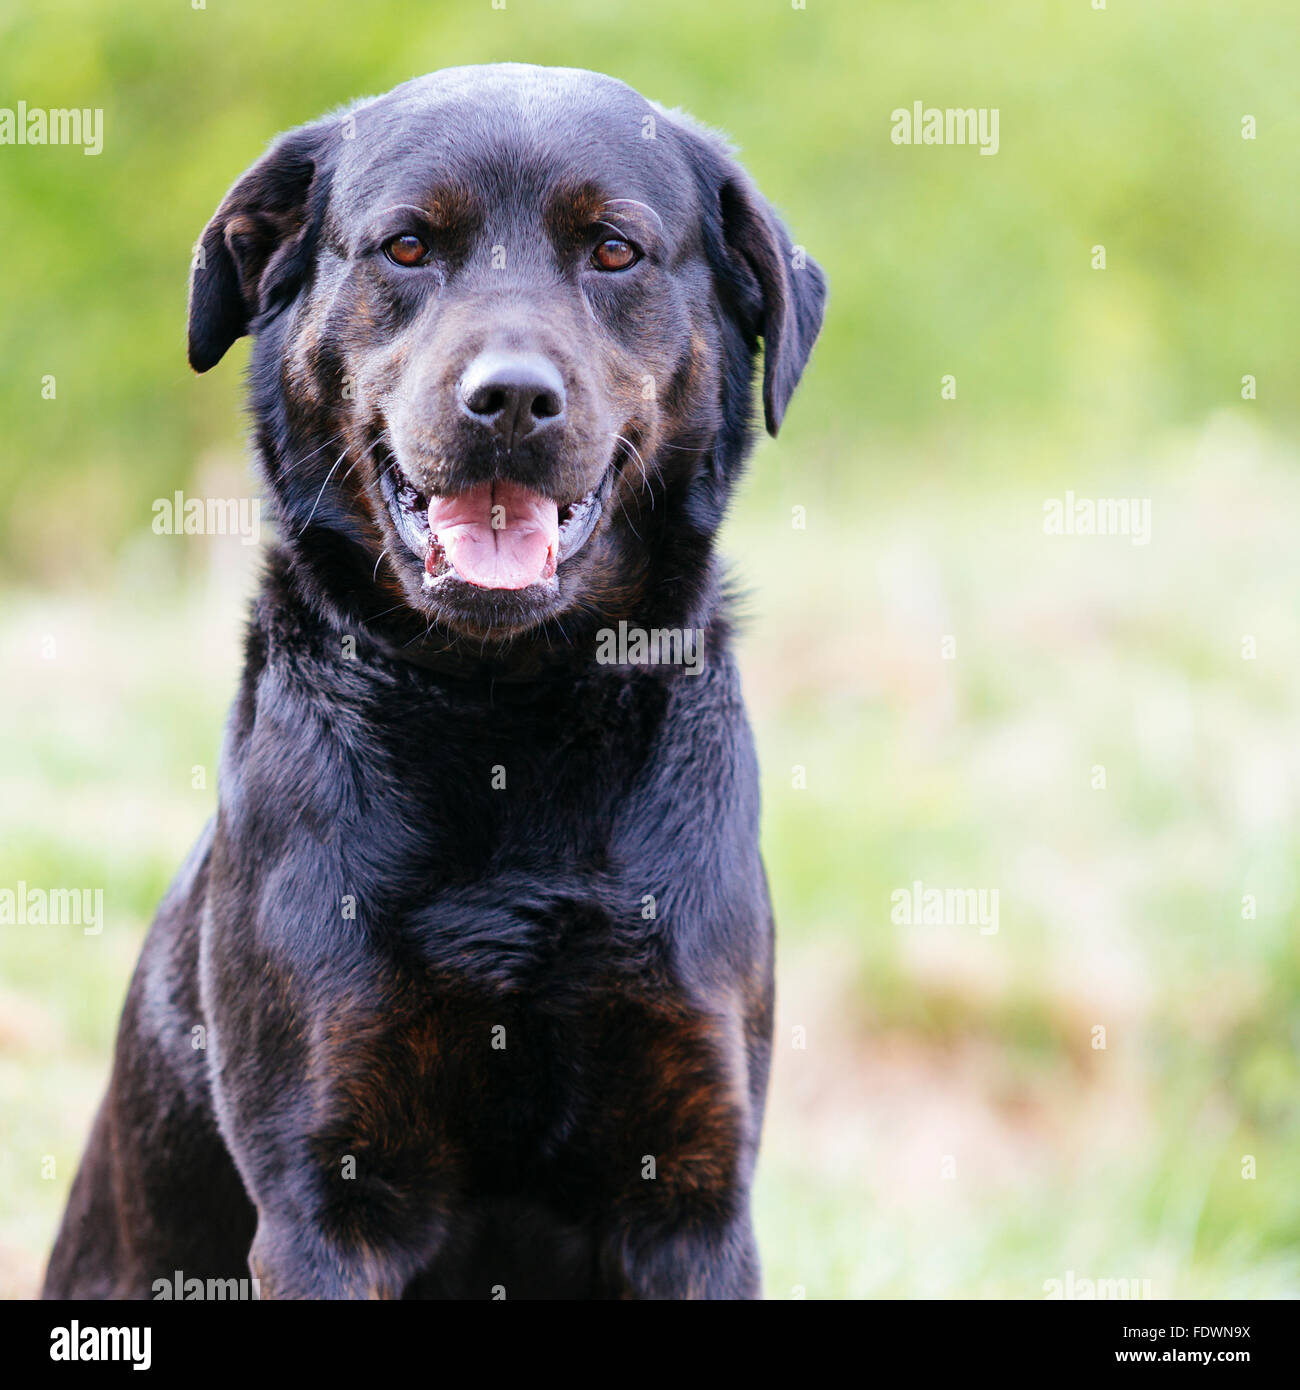 Black Rottweiler Labrador mixed breed dog outdoor portrait. Model Release:  No. Property Release: Yes (dog Stock Photo - Alamy